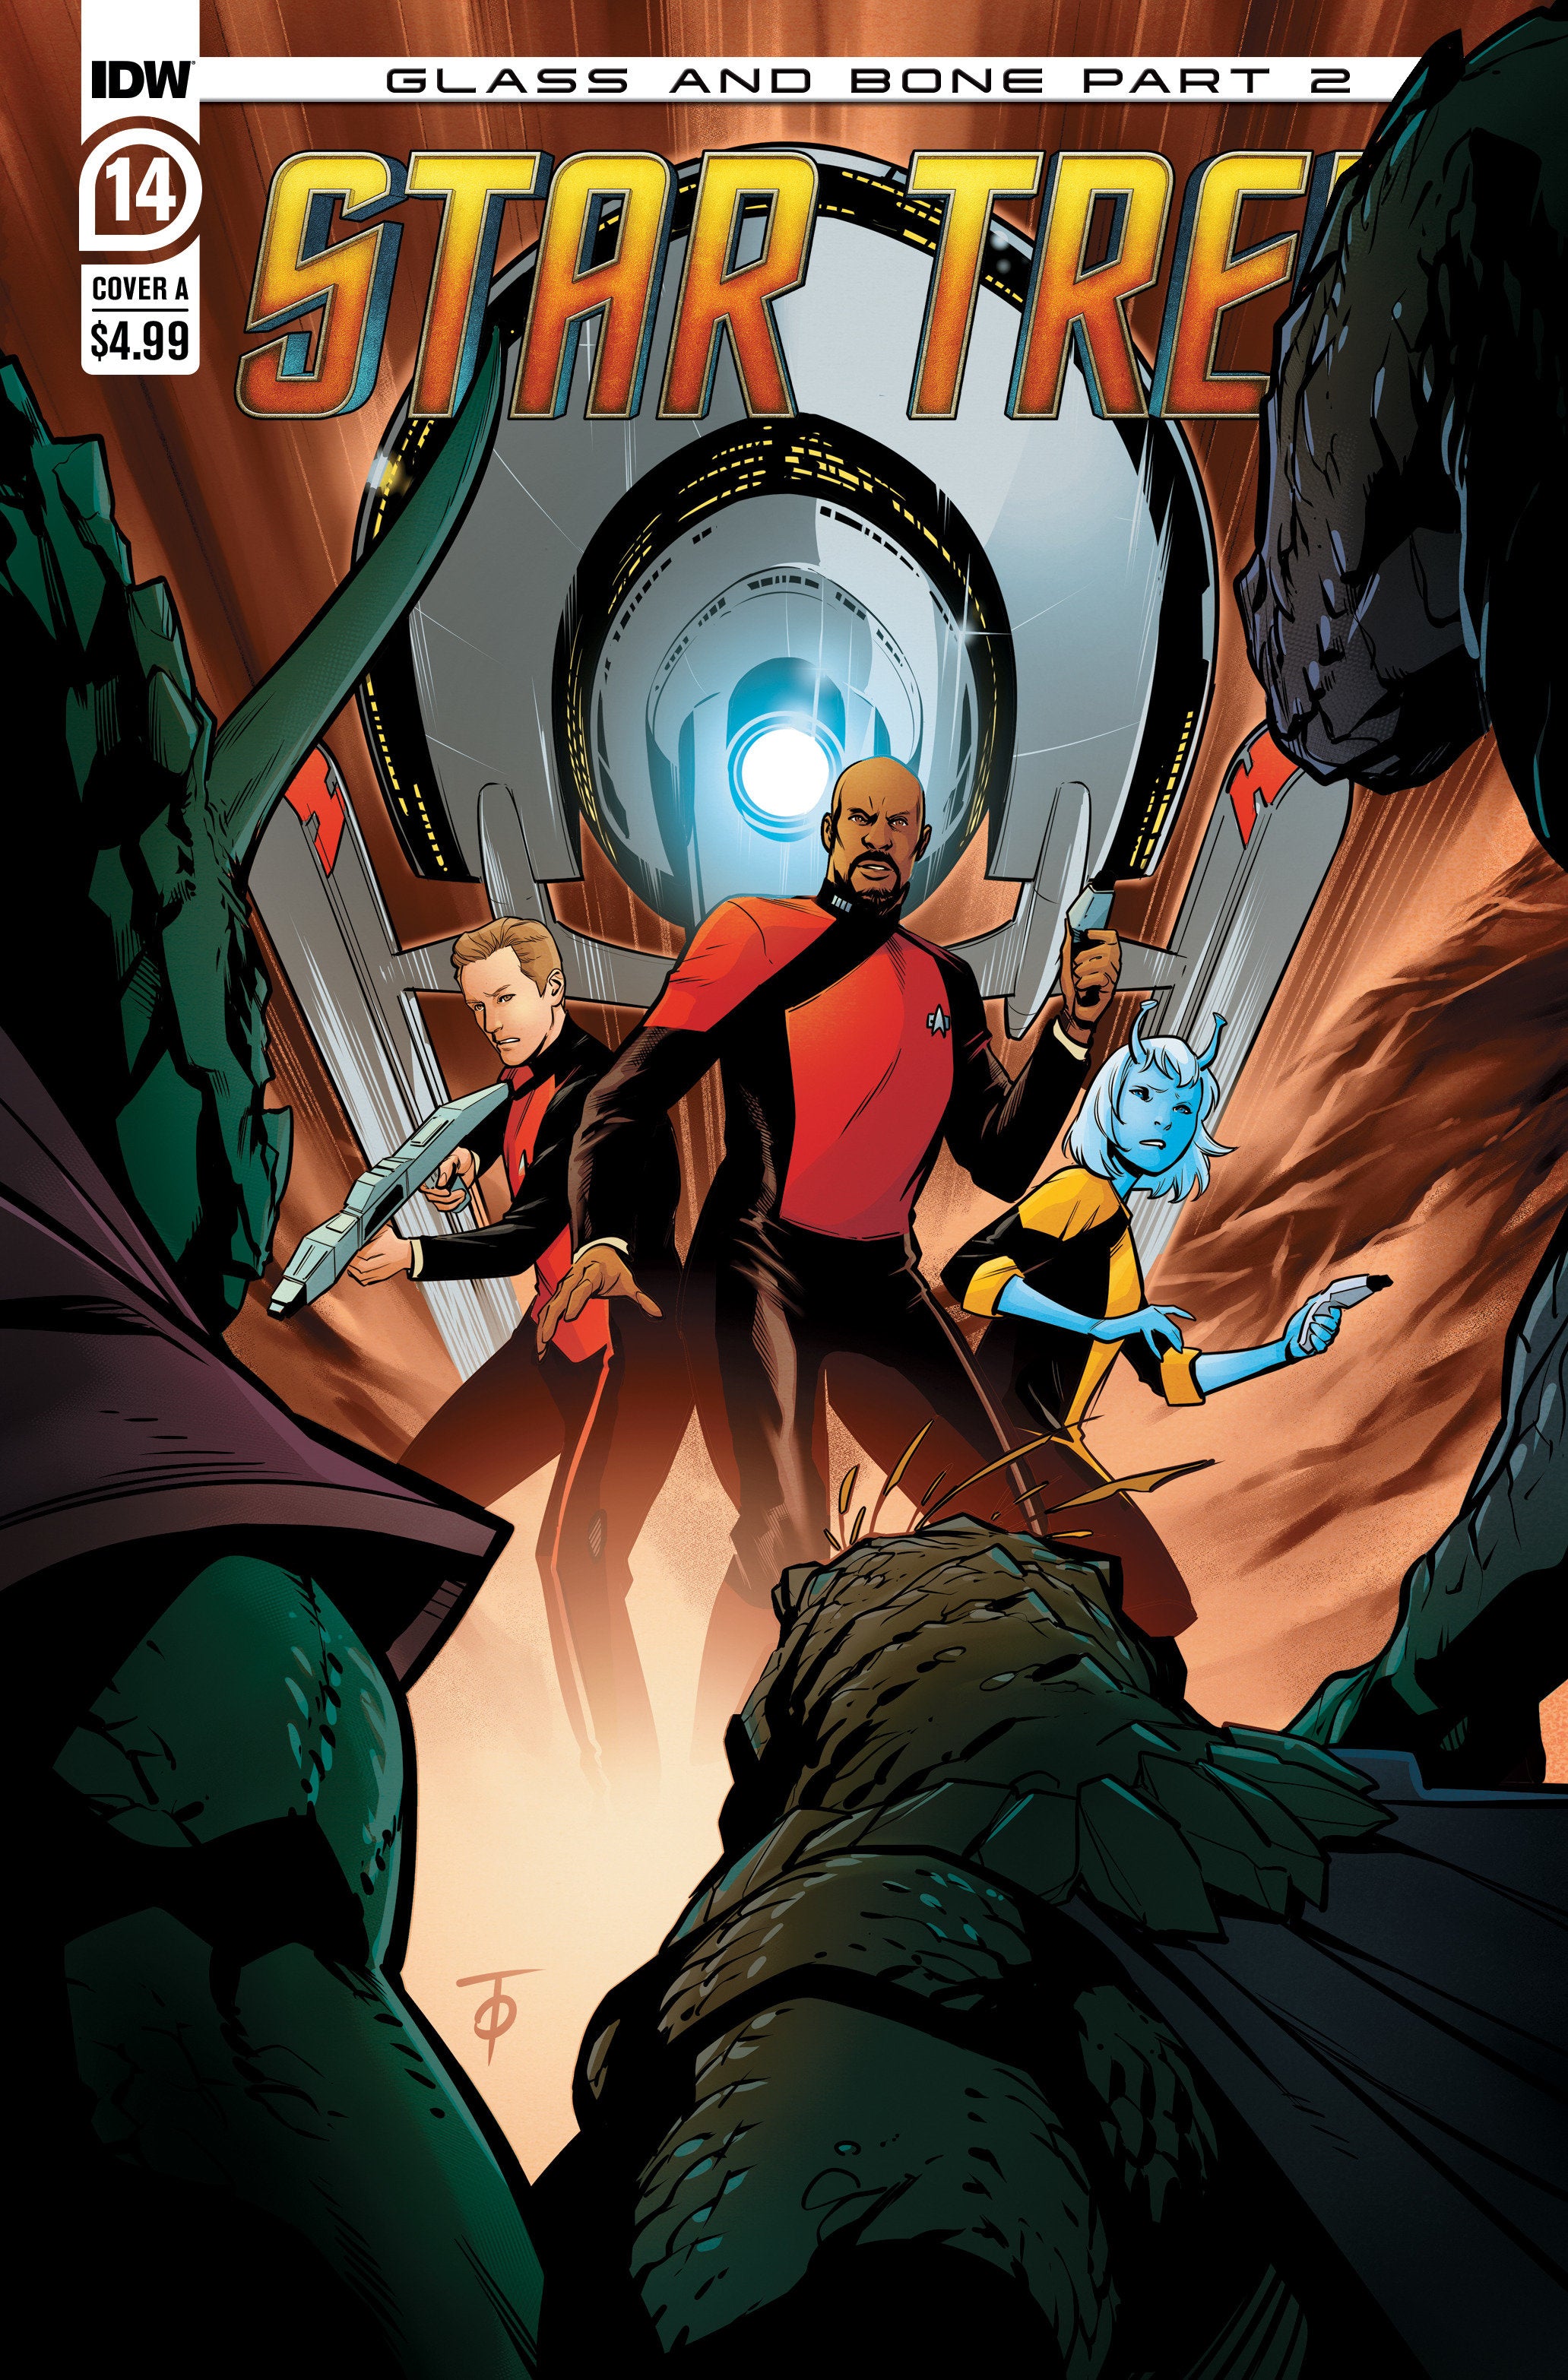 Star Trek #14 Cover A (To) | Game Master's Emporium (The New GME)